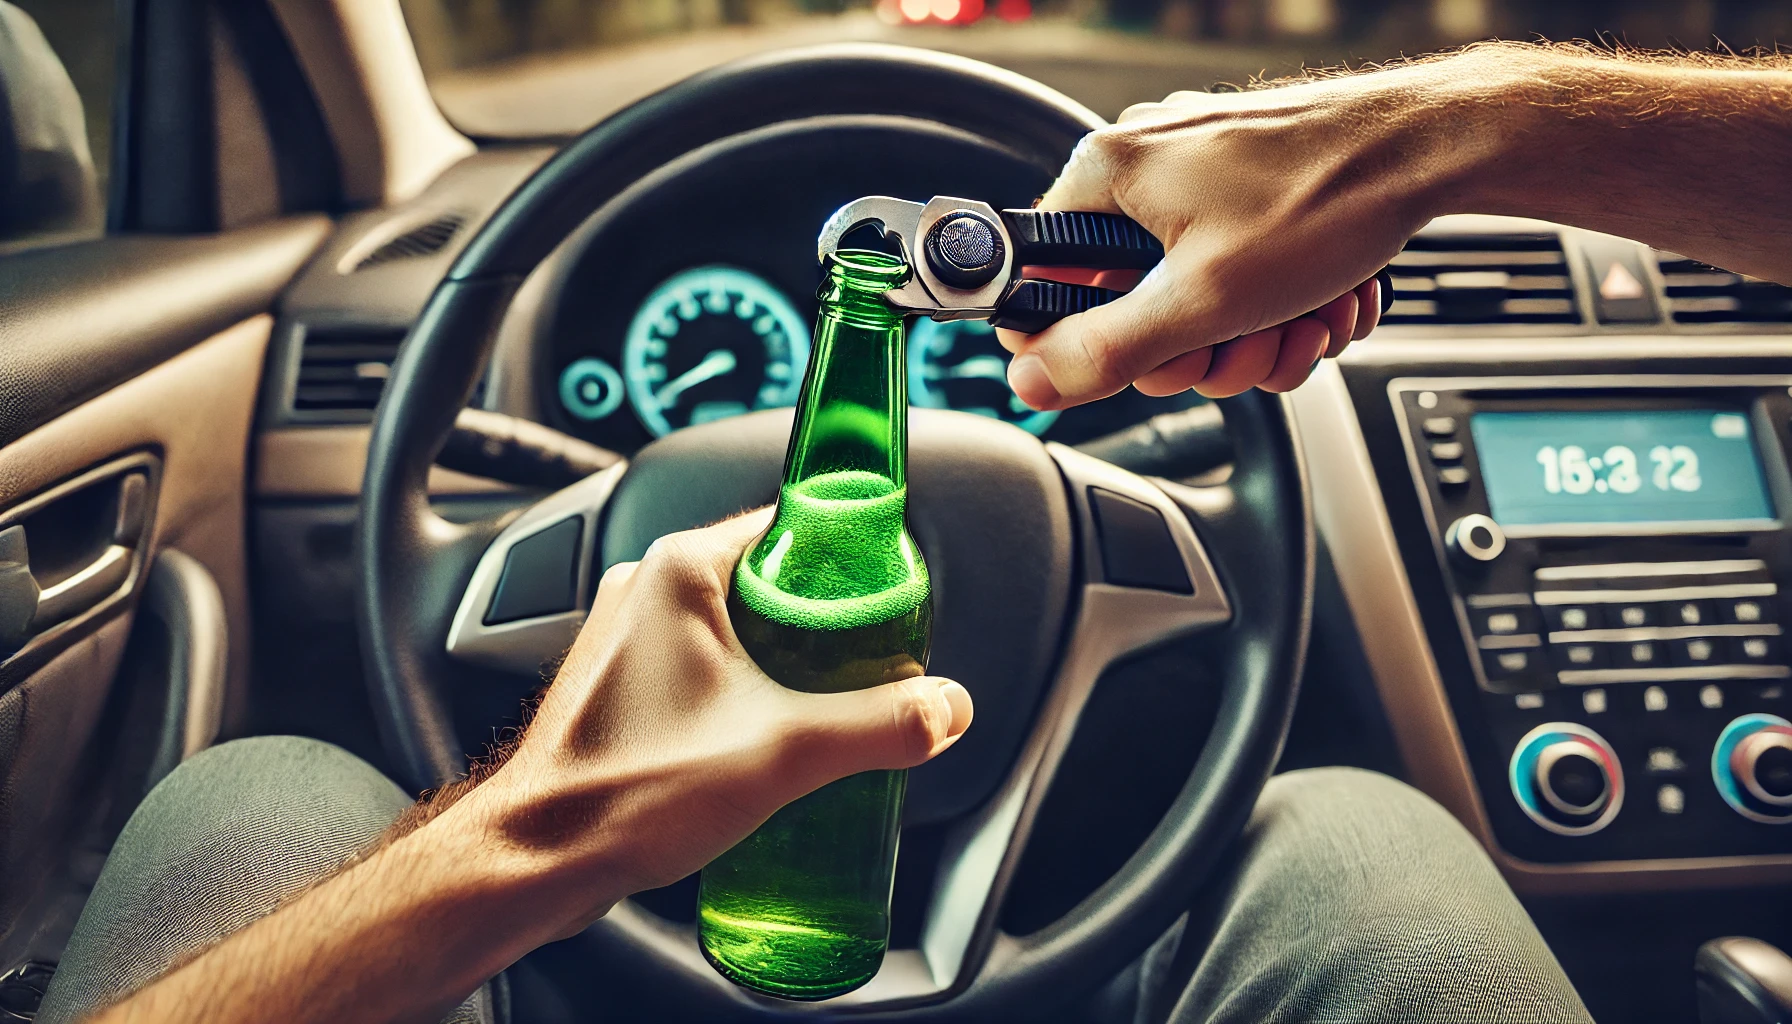 Cameras may soon have the capability to identify drivers impaired by alcohol.